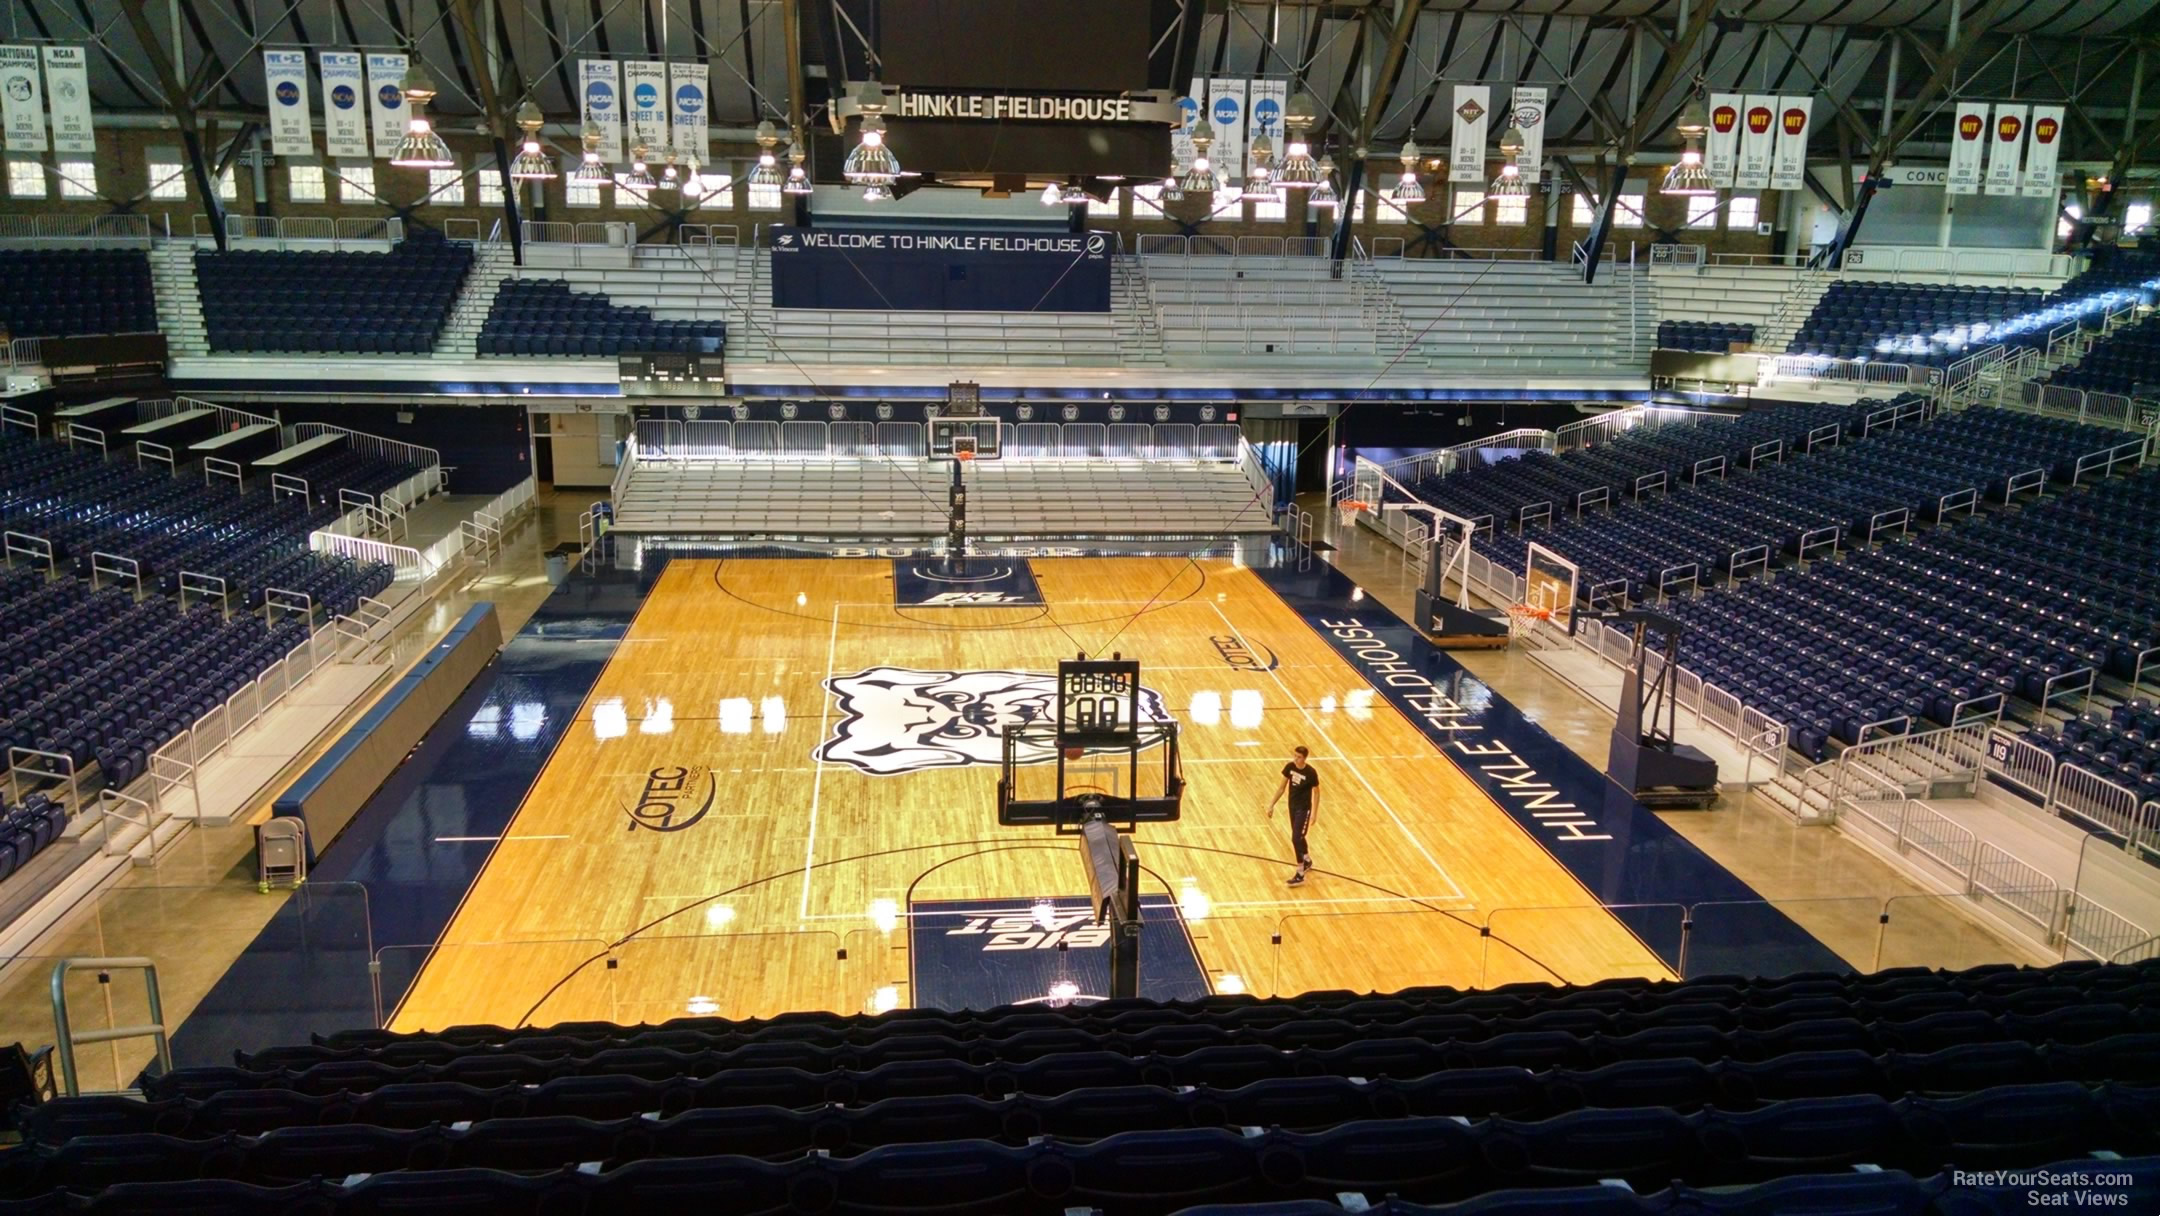 section 201, row 10 seat view  - hinkle fieldhouse